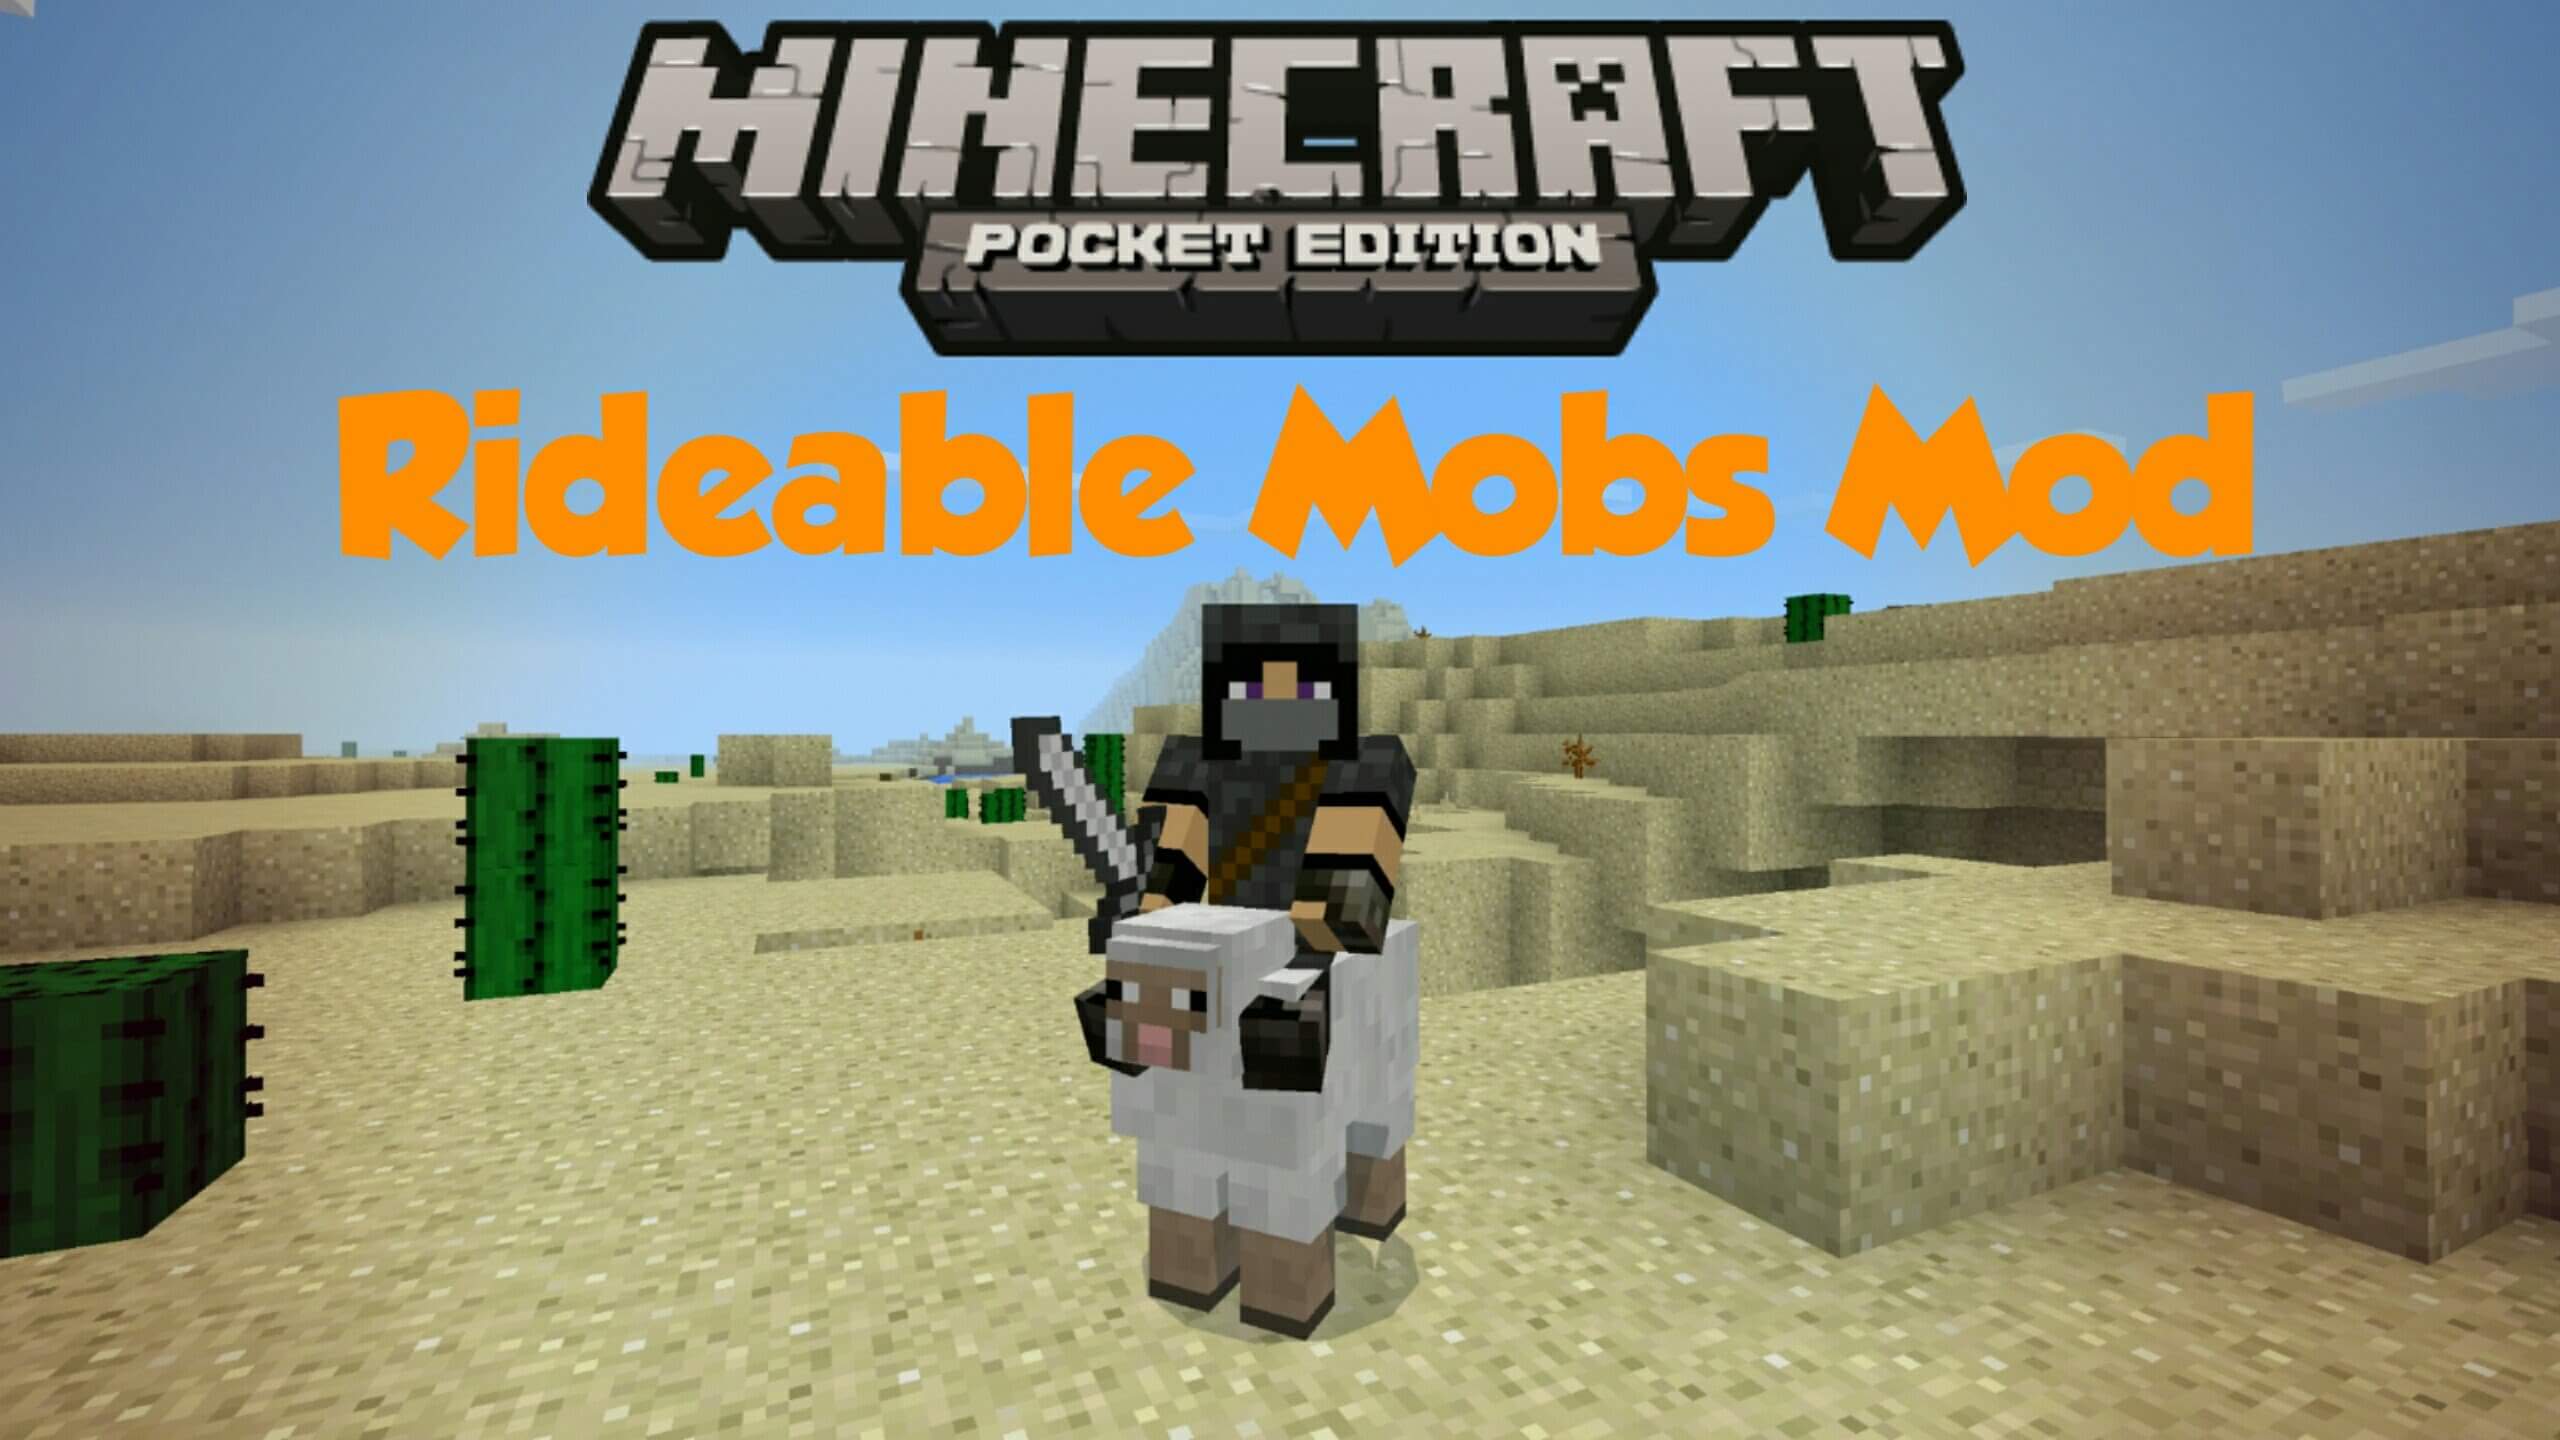 Мод scary mobs